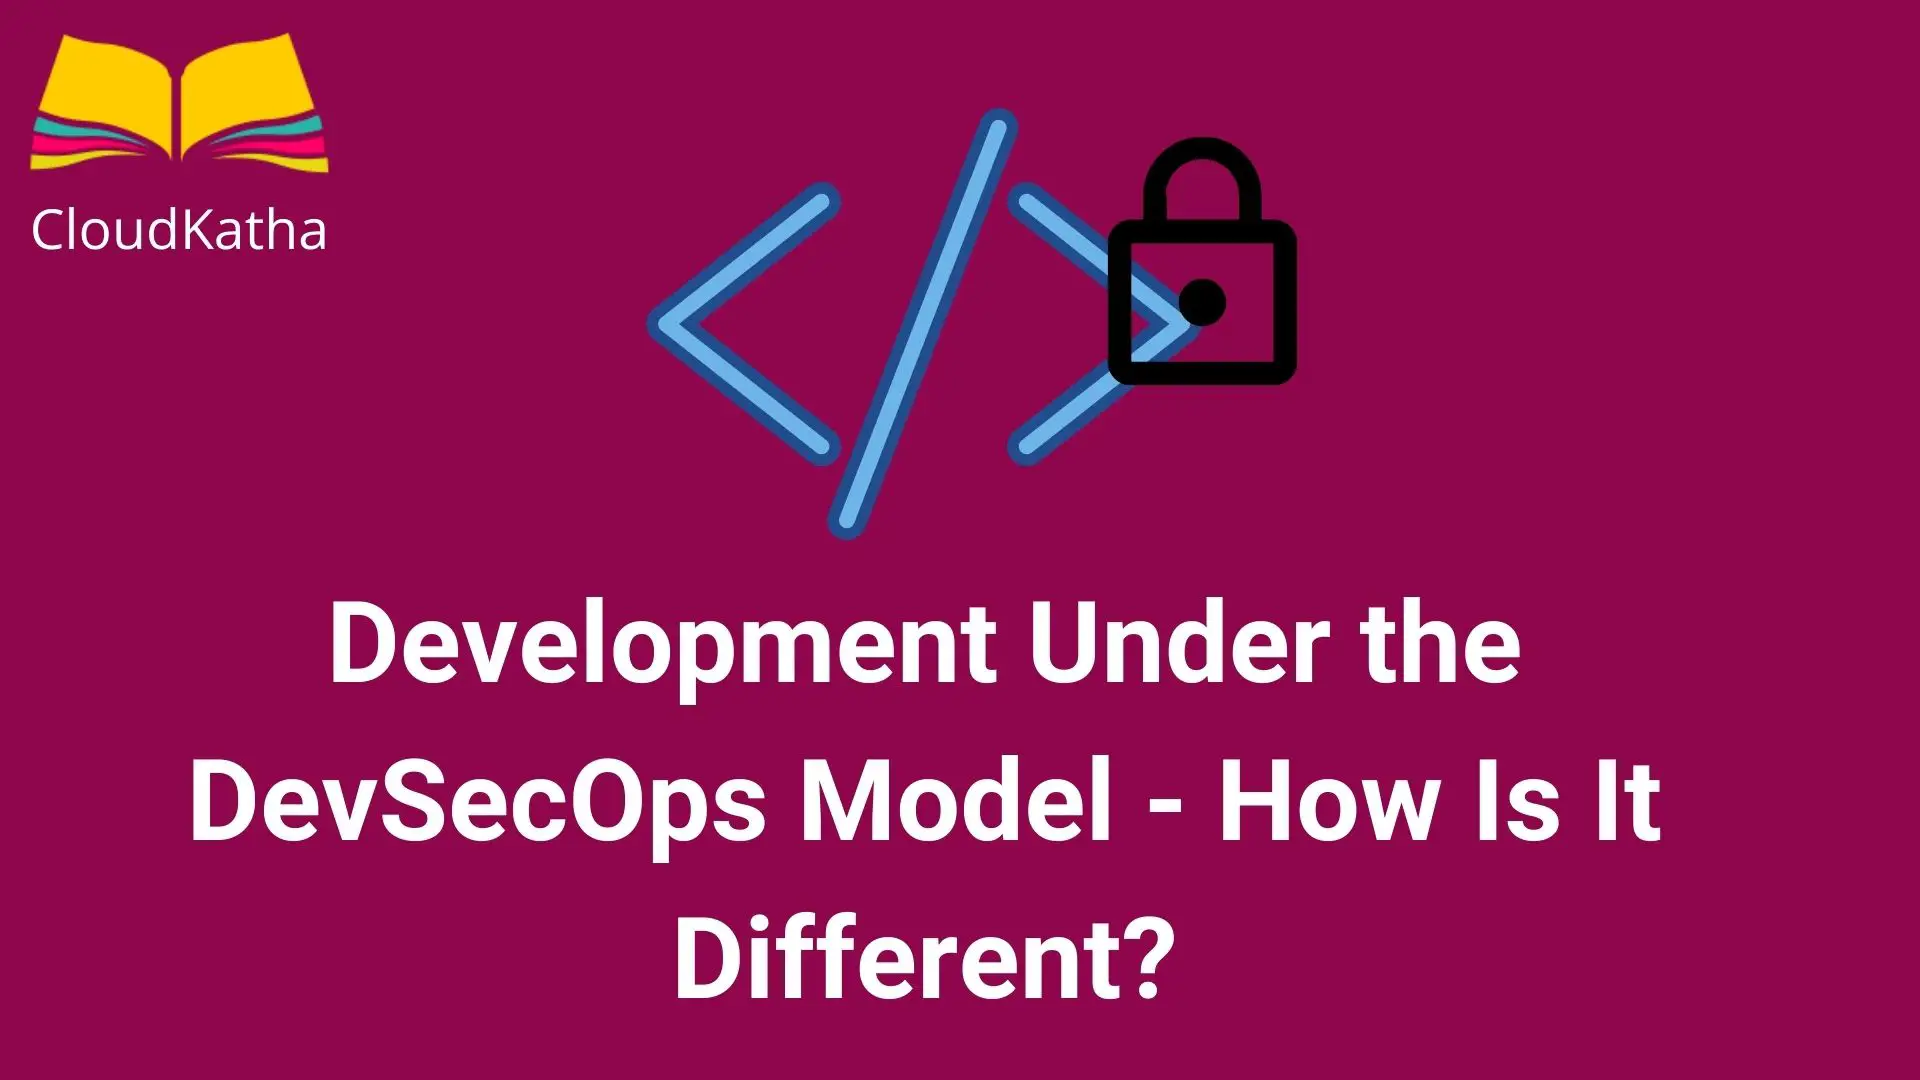 Development Under the DevSecOps Model - How Is It Different